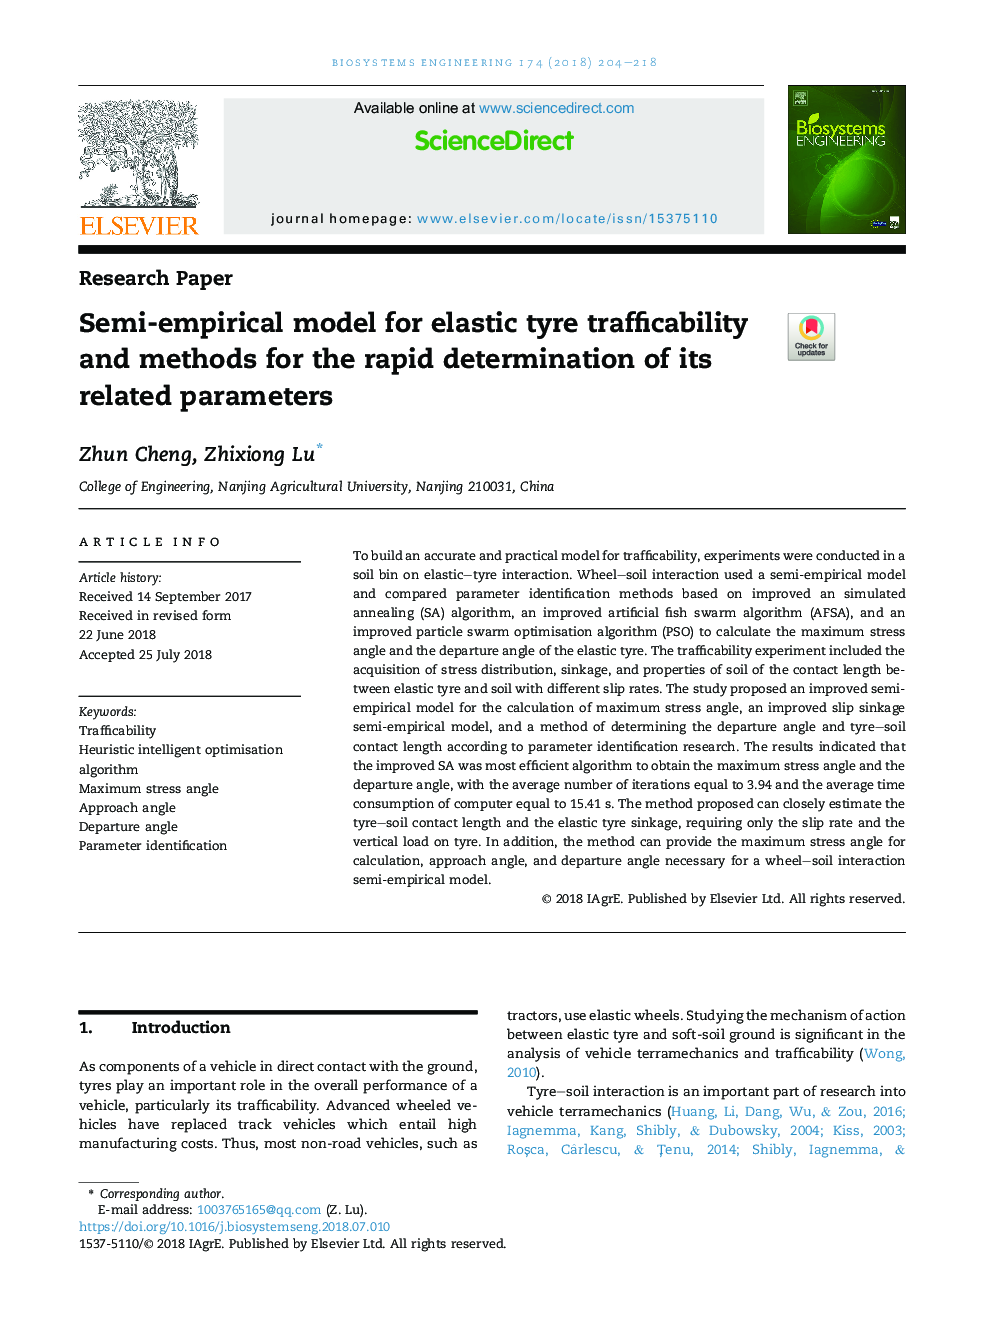 Semi-empirical model for elastic tyre trafficability and methods for the rapid determination of its related parameters